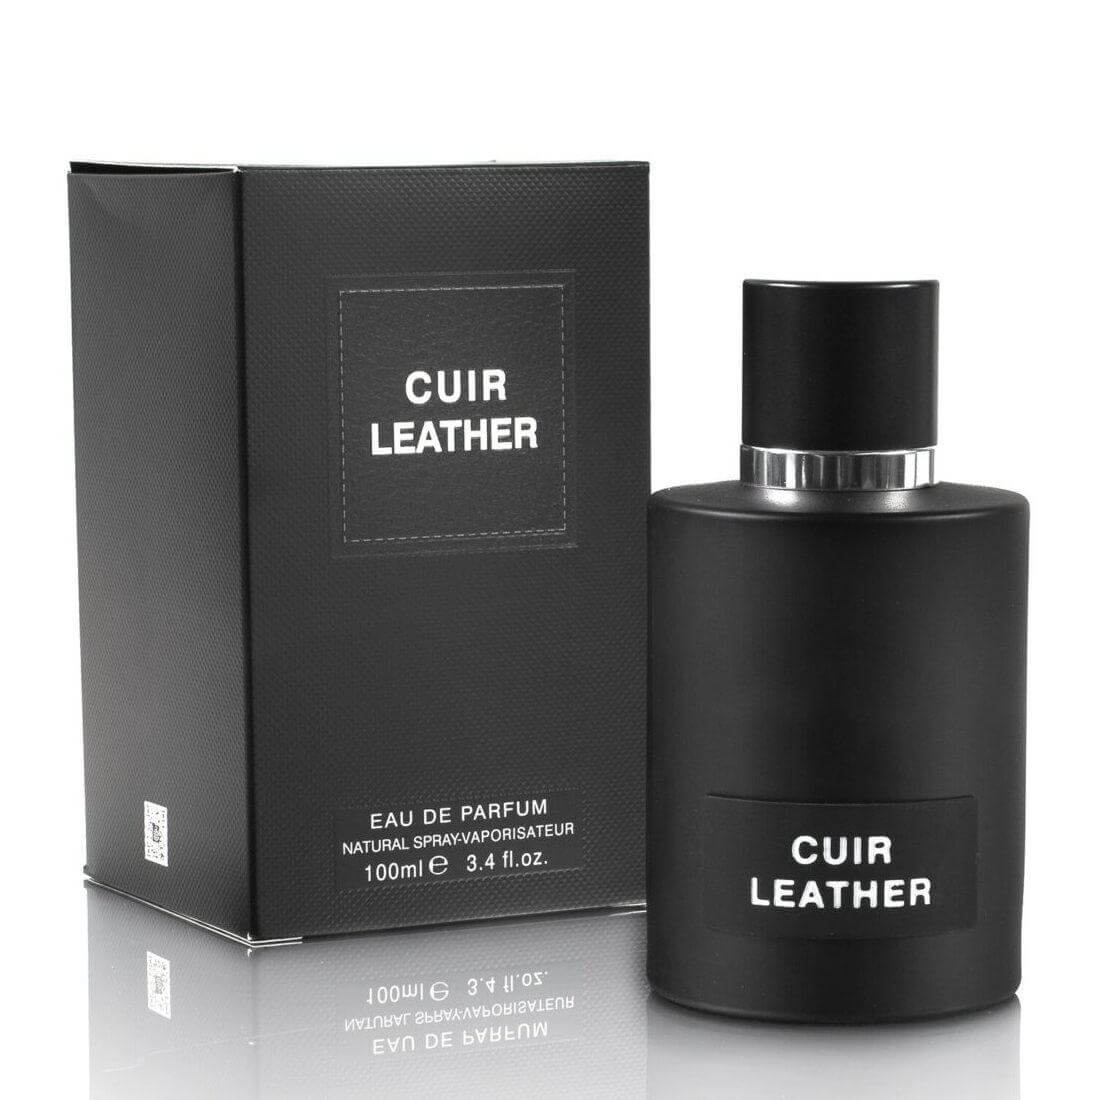 Cuir Leather Perfume / Eau De Parfum By Fragrance World (Inspired By Ombré Leather - Tom Ford)